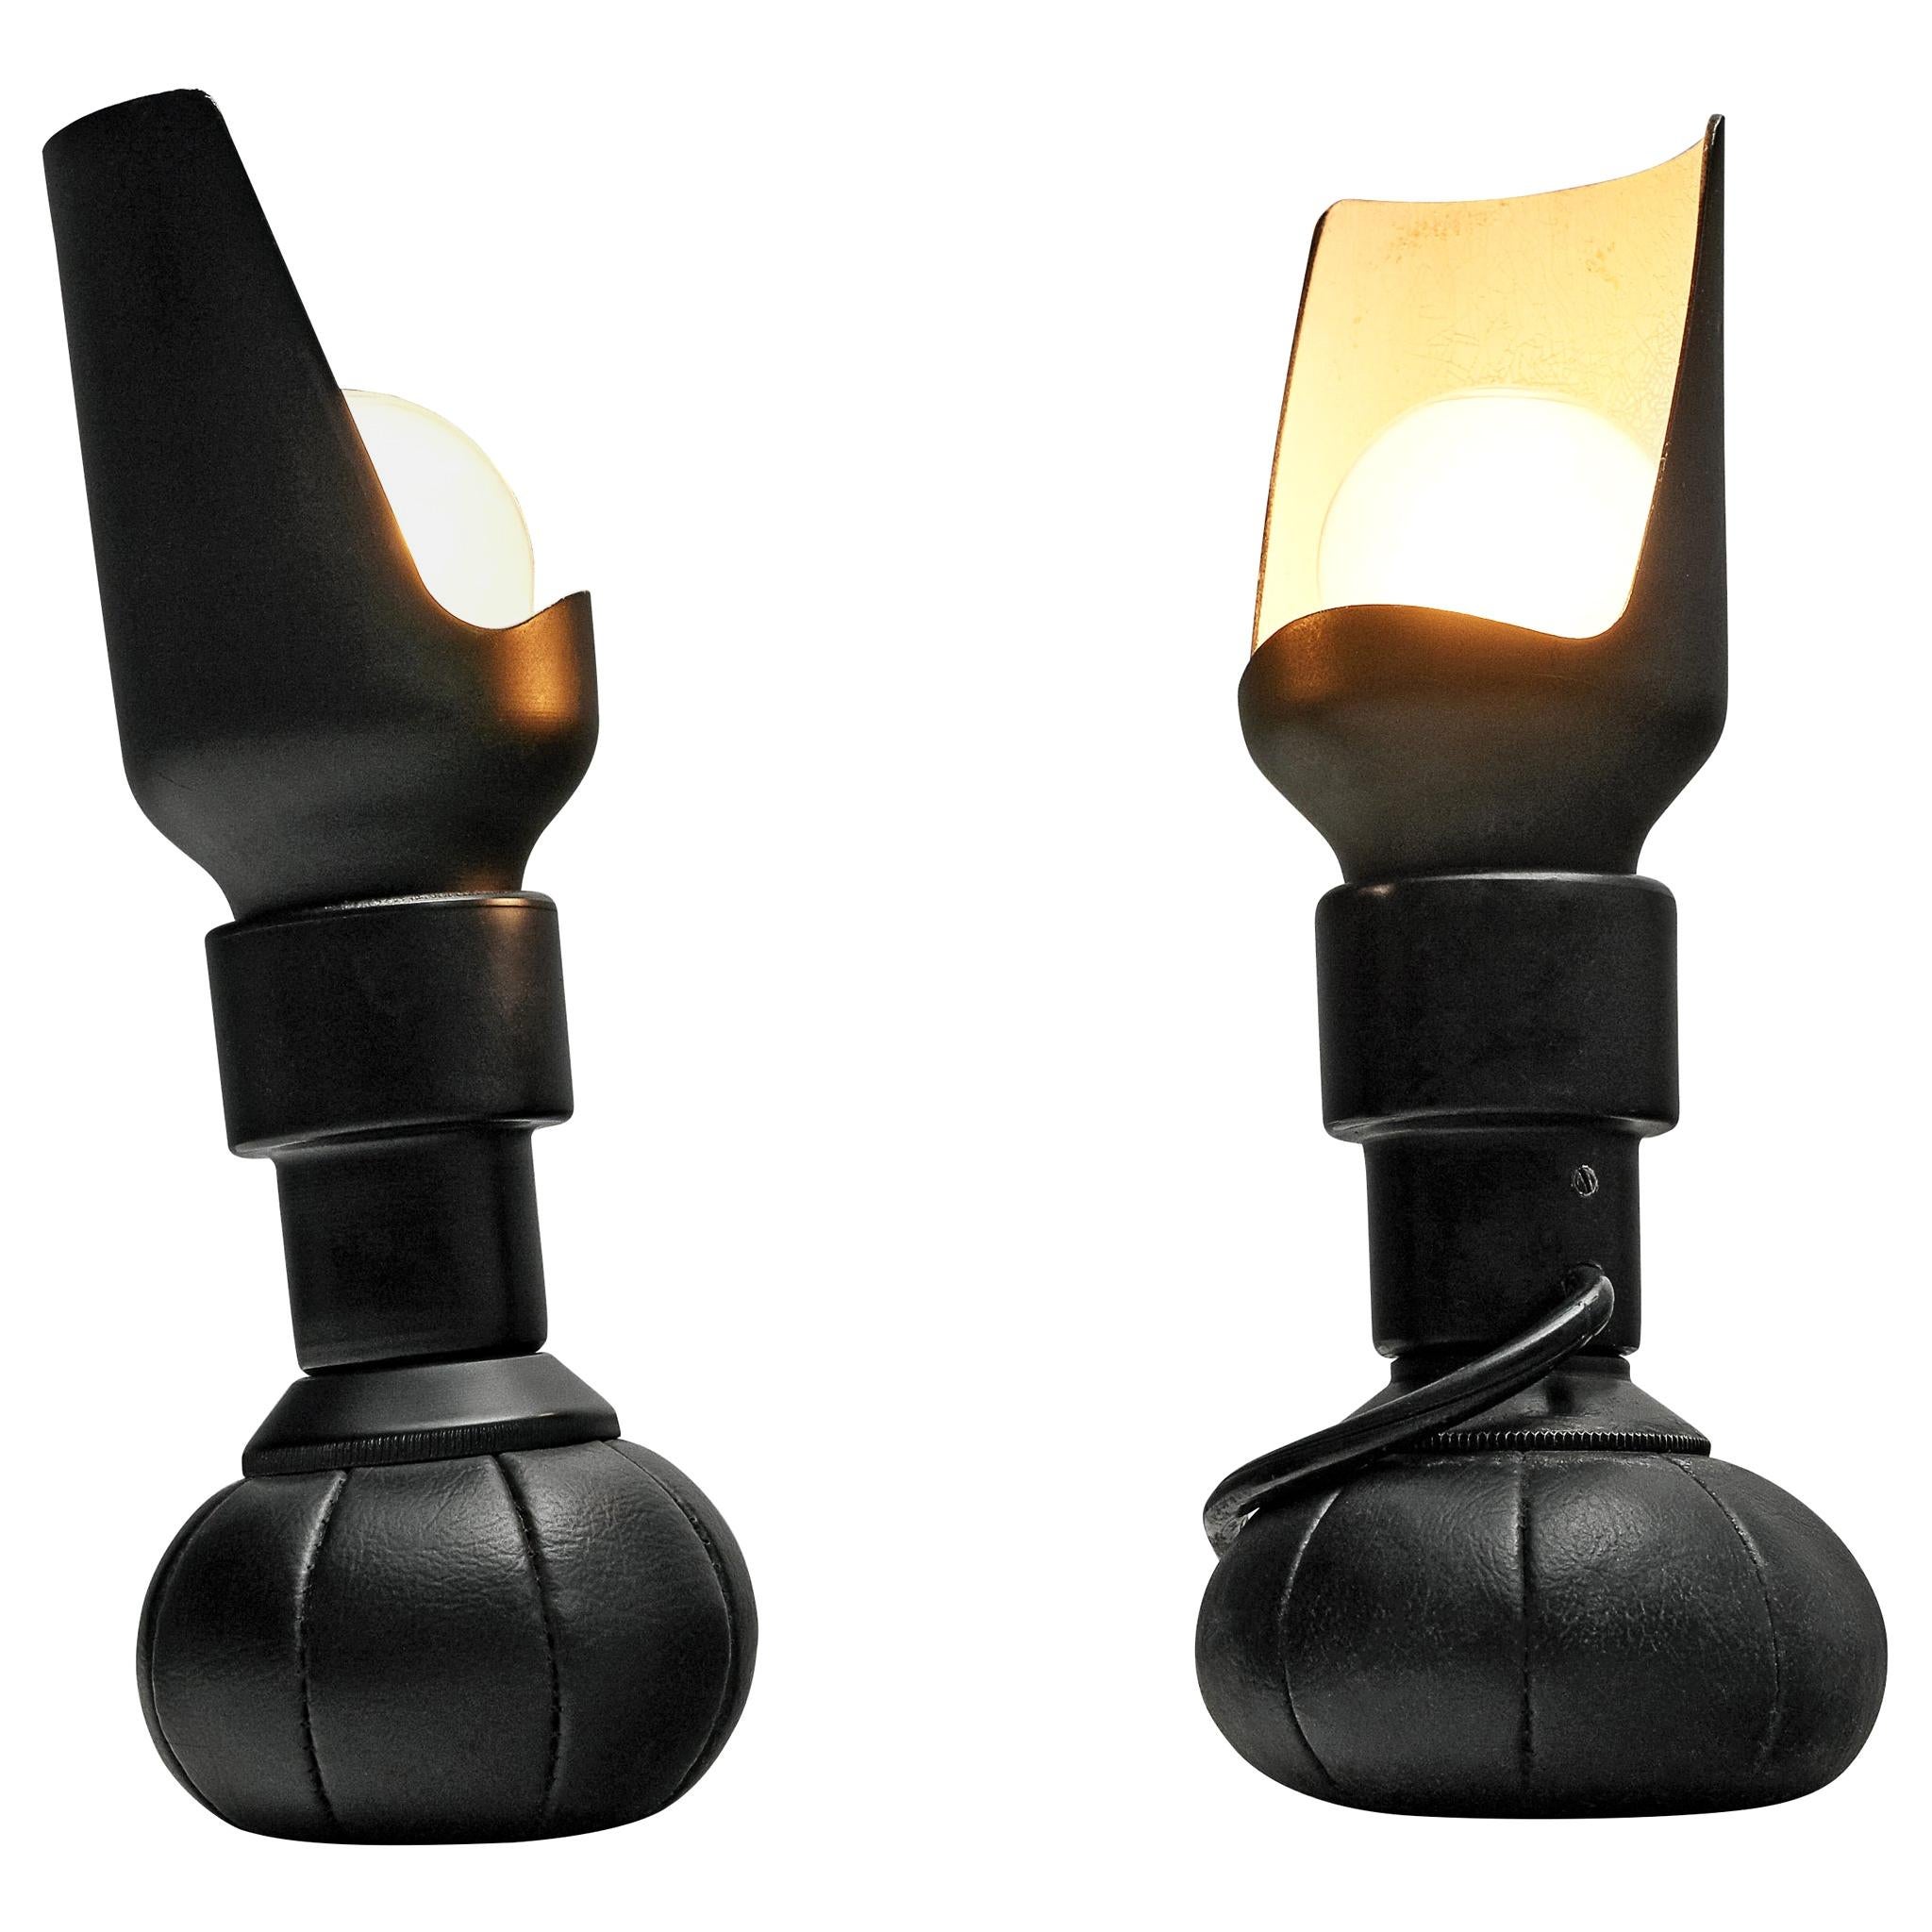 Pair of Gino Sarfatti for Arteluce Playful Table Lamps 600C